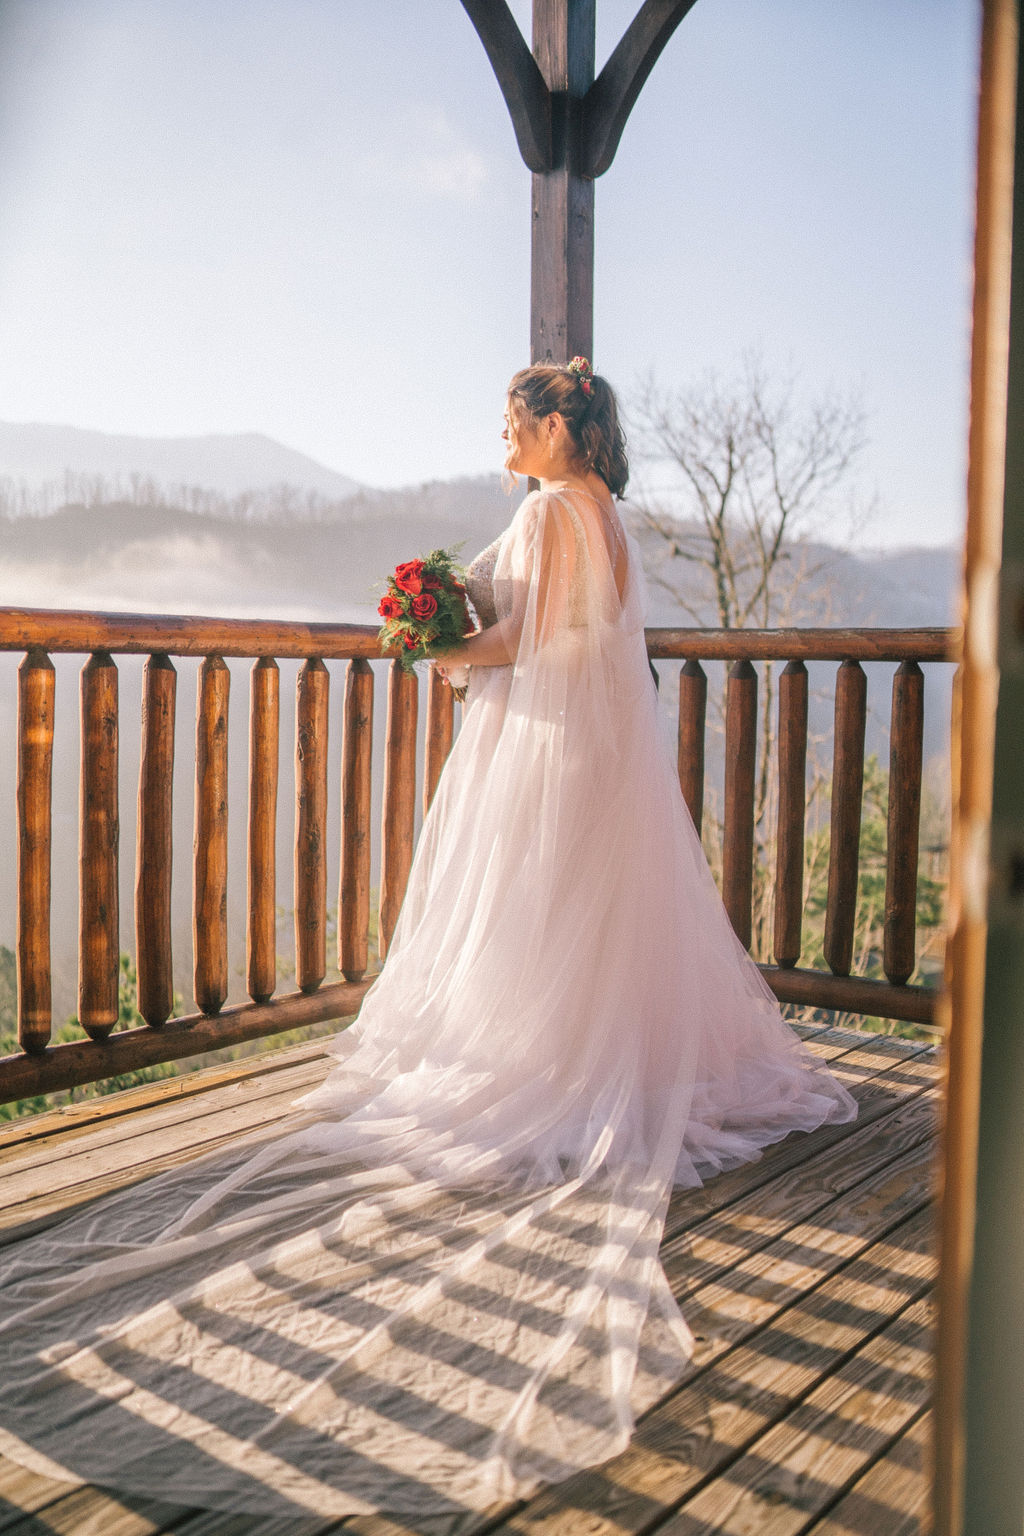 smoky mountain bride on her wedding day surrounded by fog as she looks out the balcony wearing her sparkly wedding gown and holding her red roses